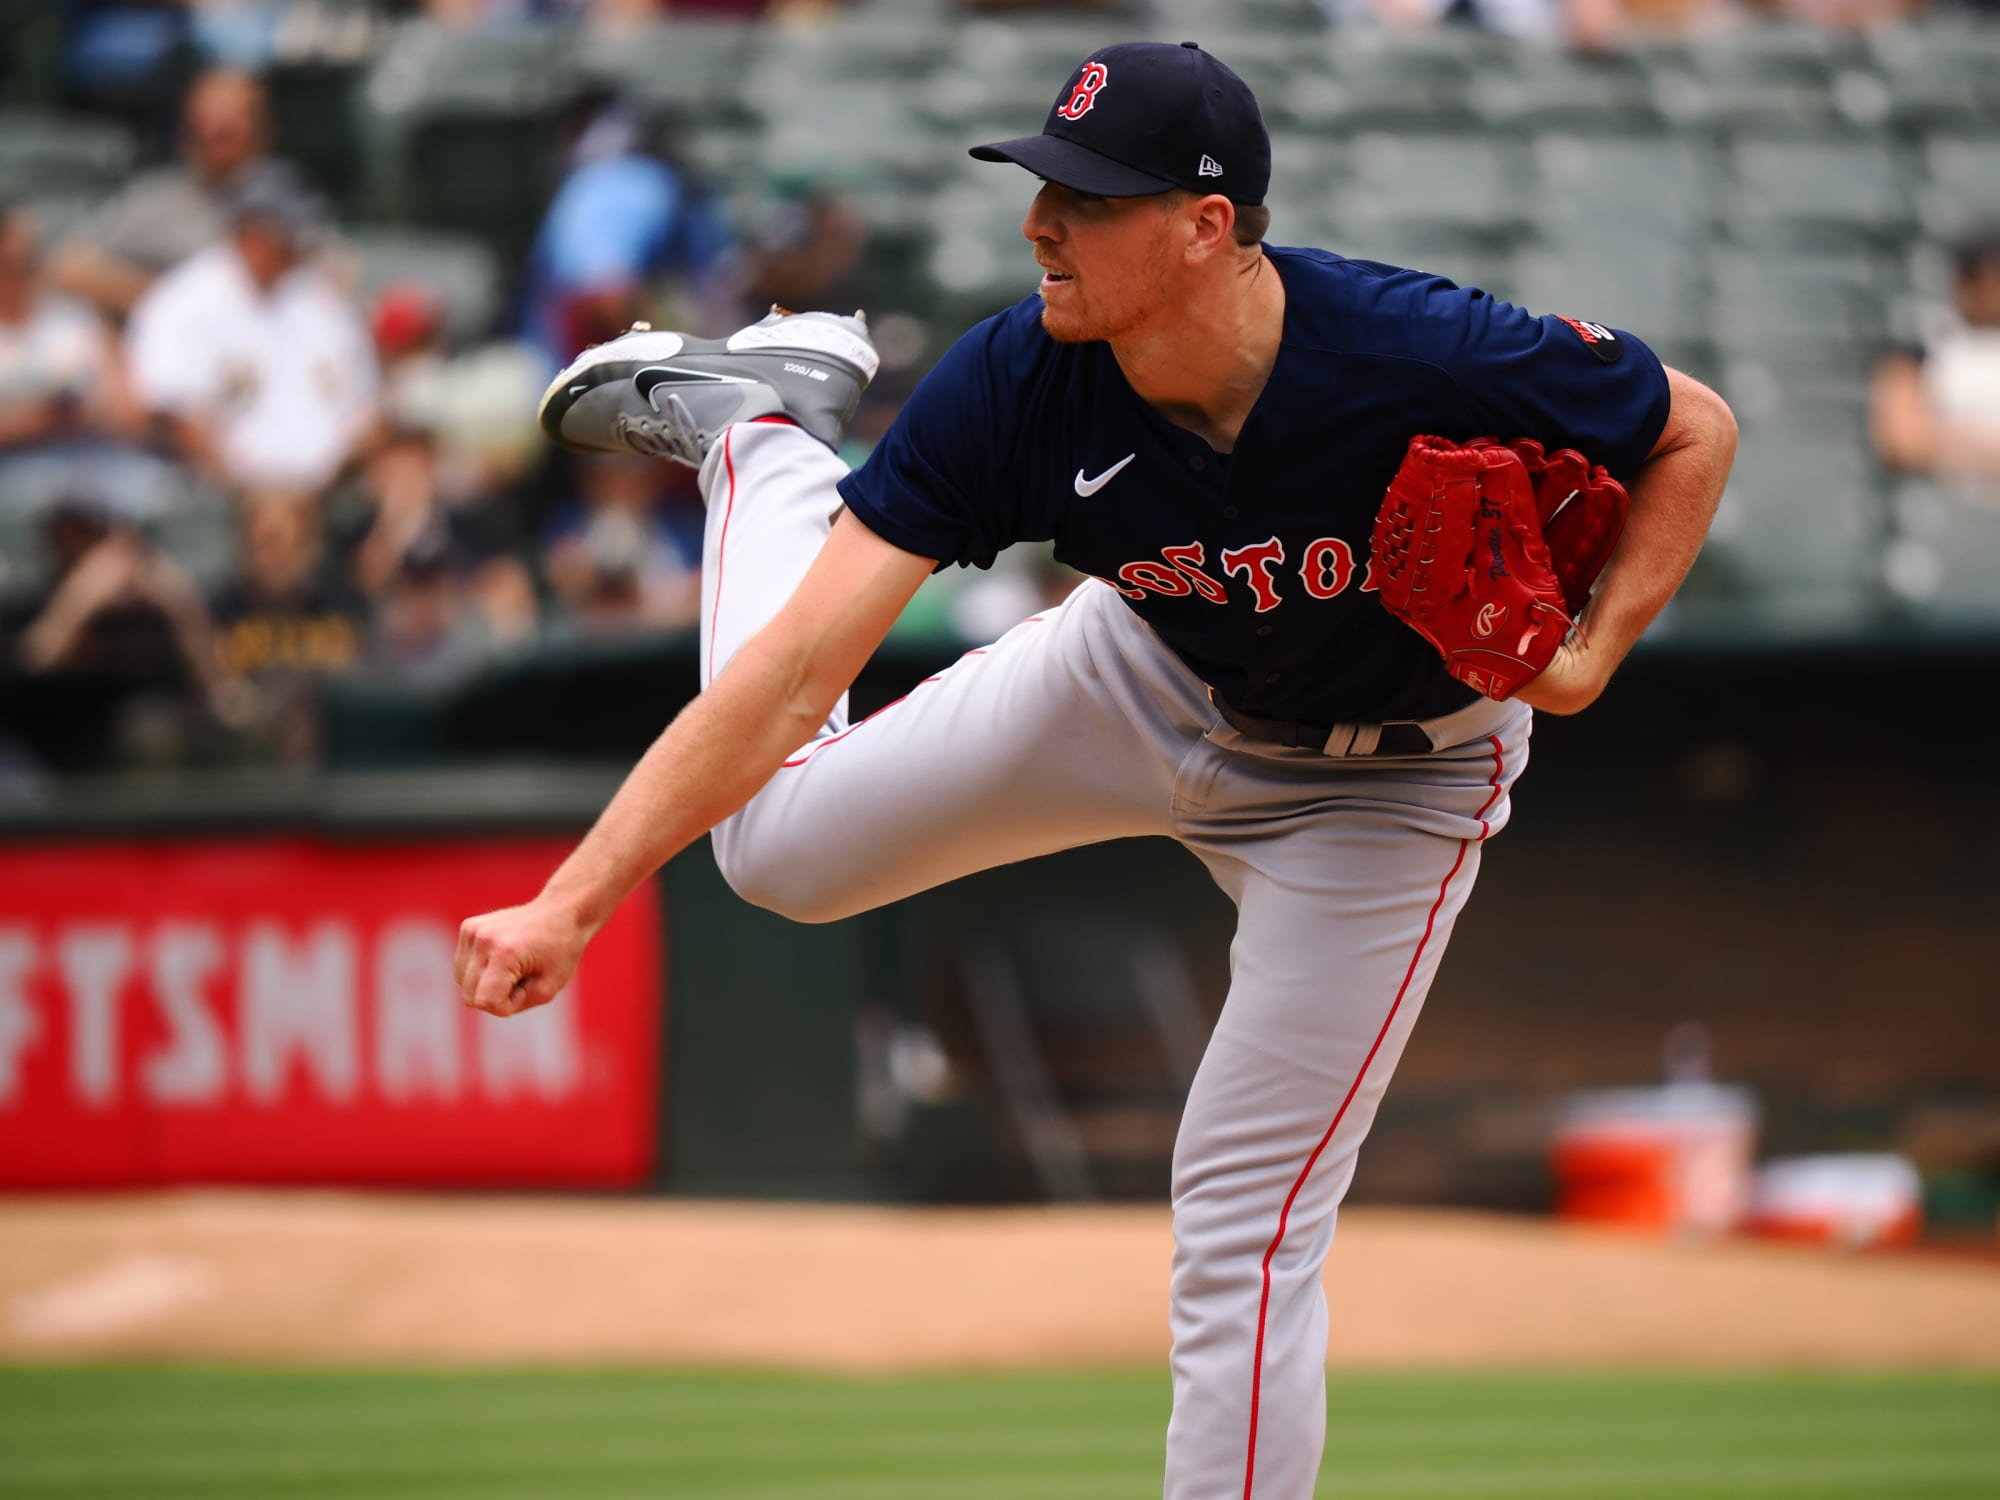 Boston Red Sox: Nick Pivetta continues to dazzle on the mound